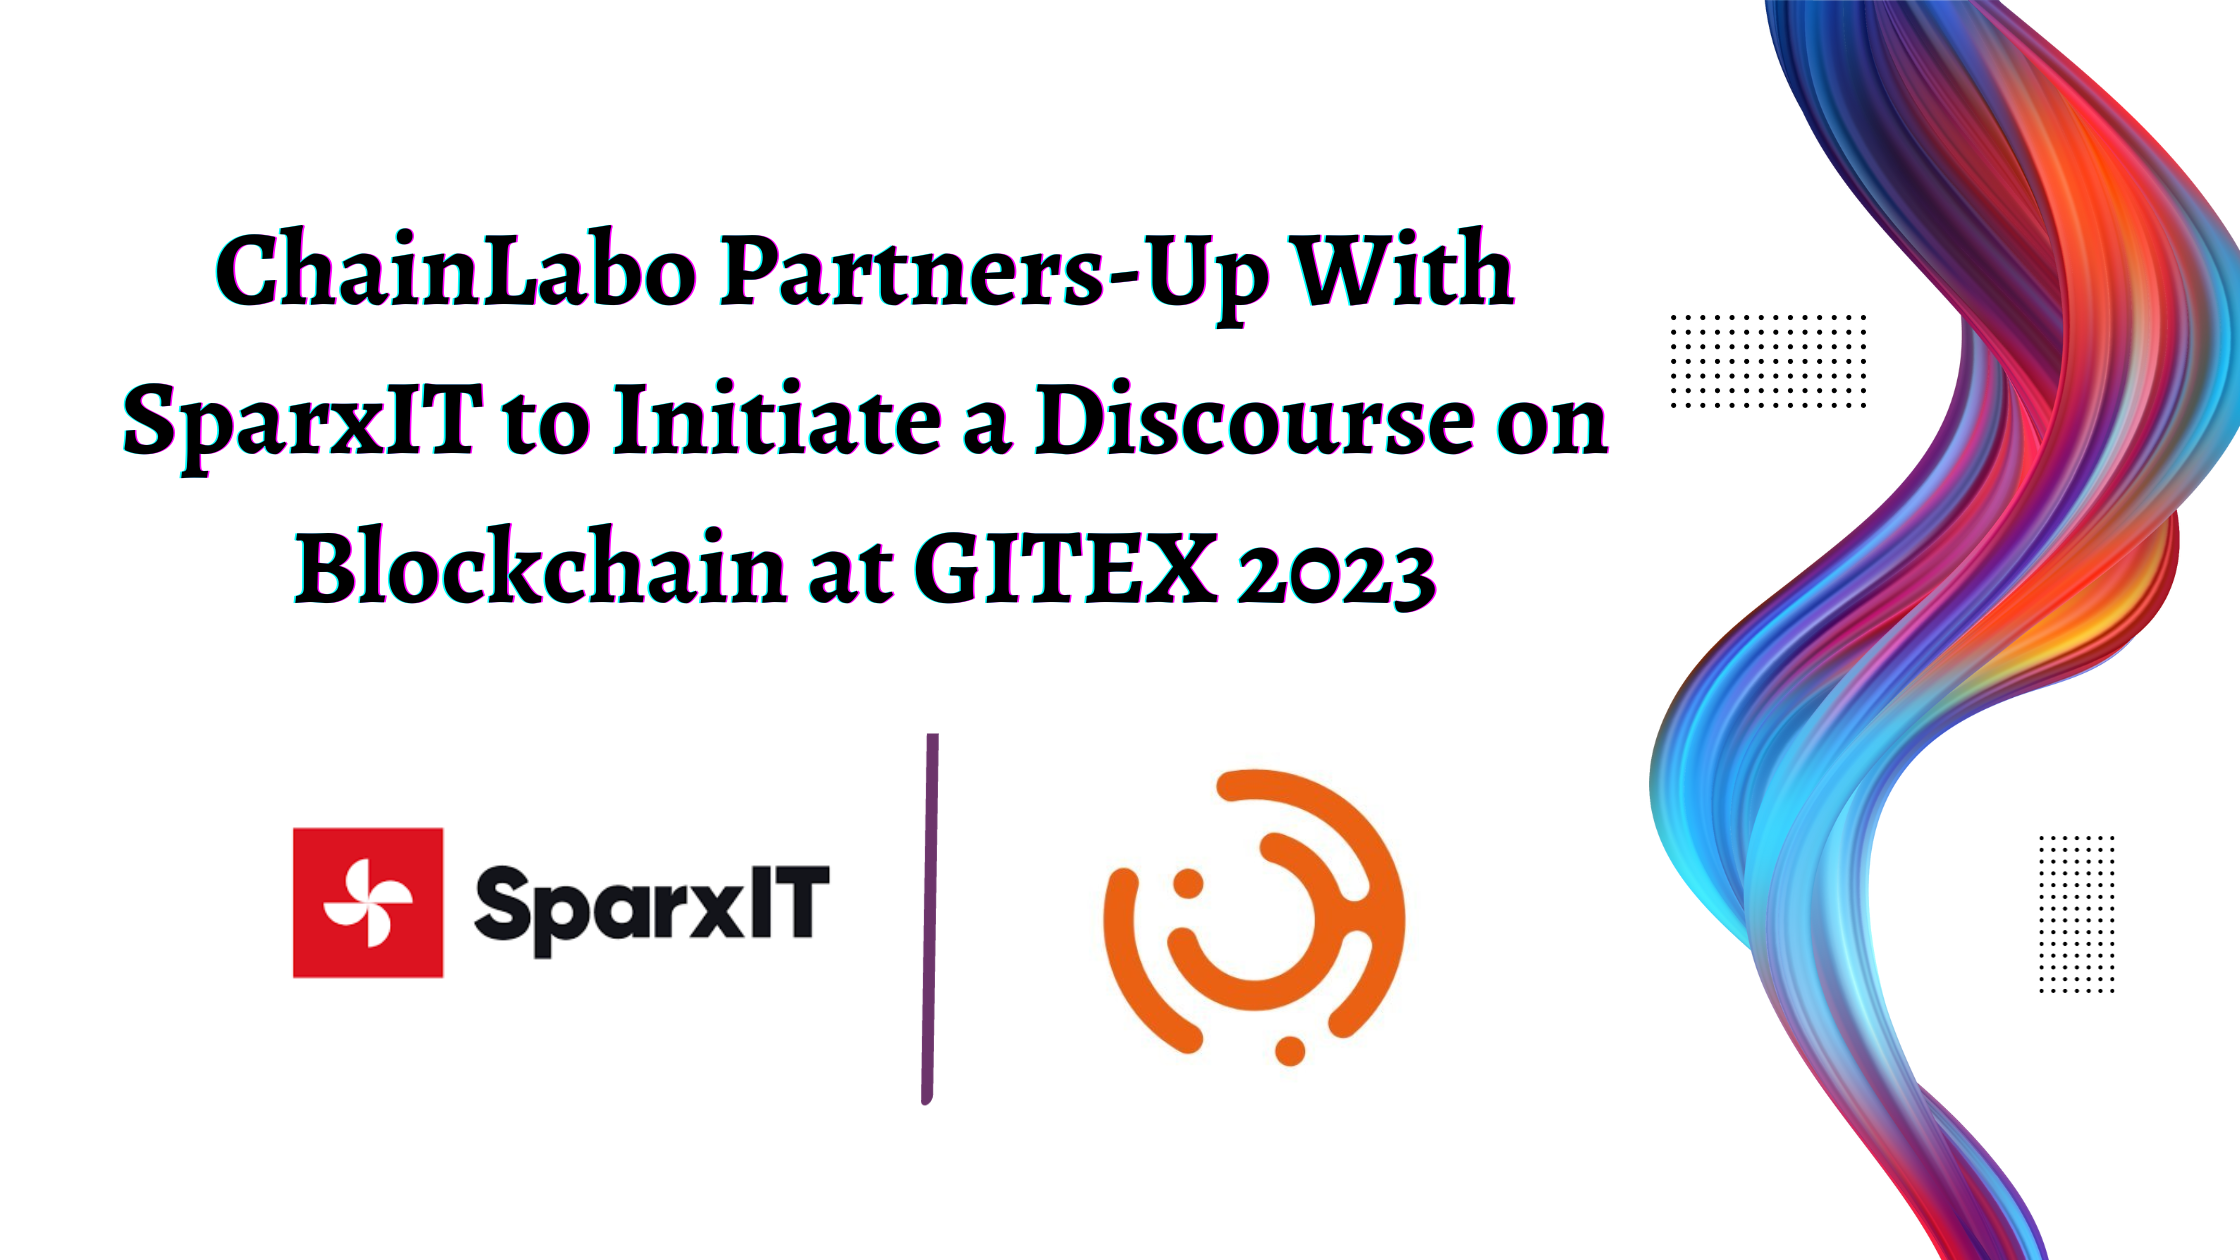 ChainLabo Partners-Up With SparxIT to Initiate a Discourse on Blockchain at GITEX 2023